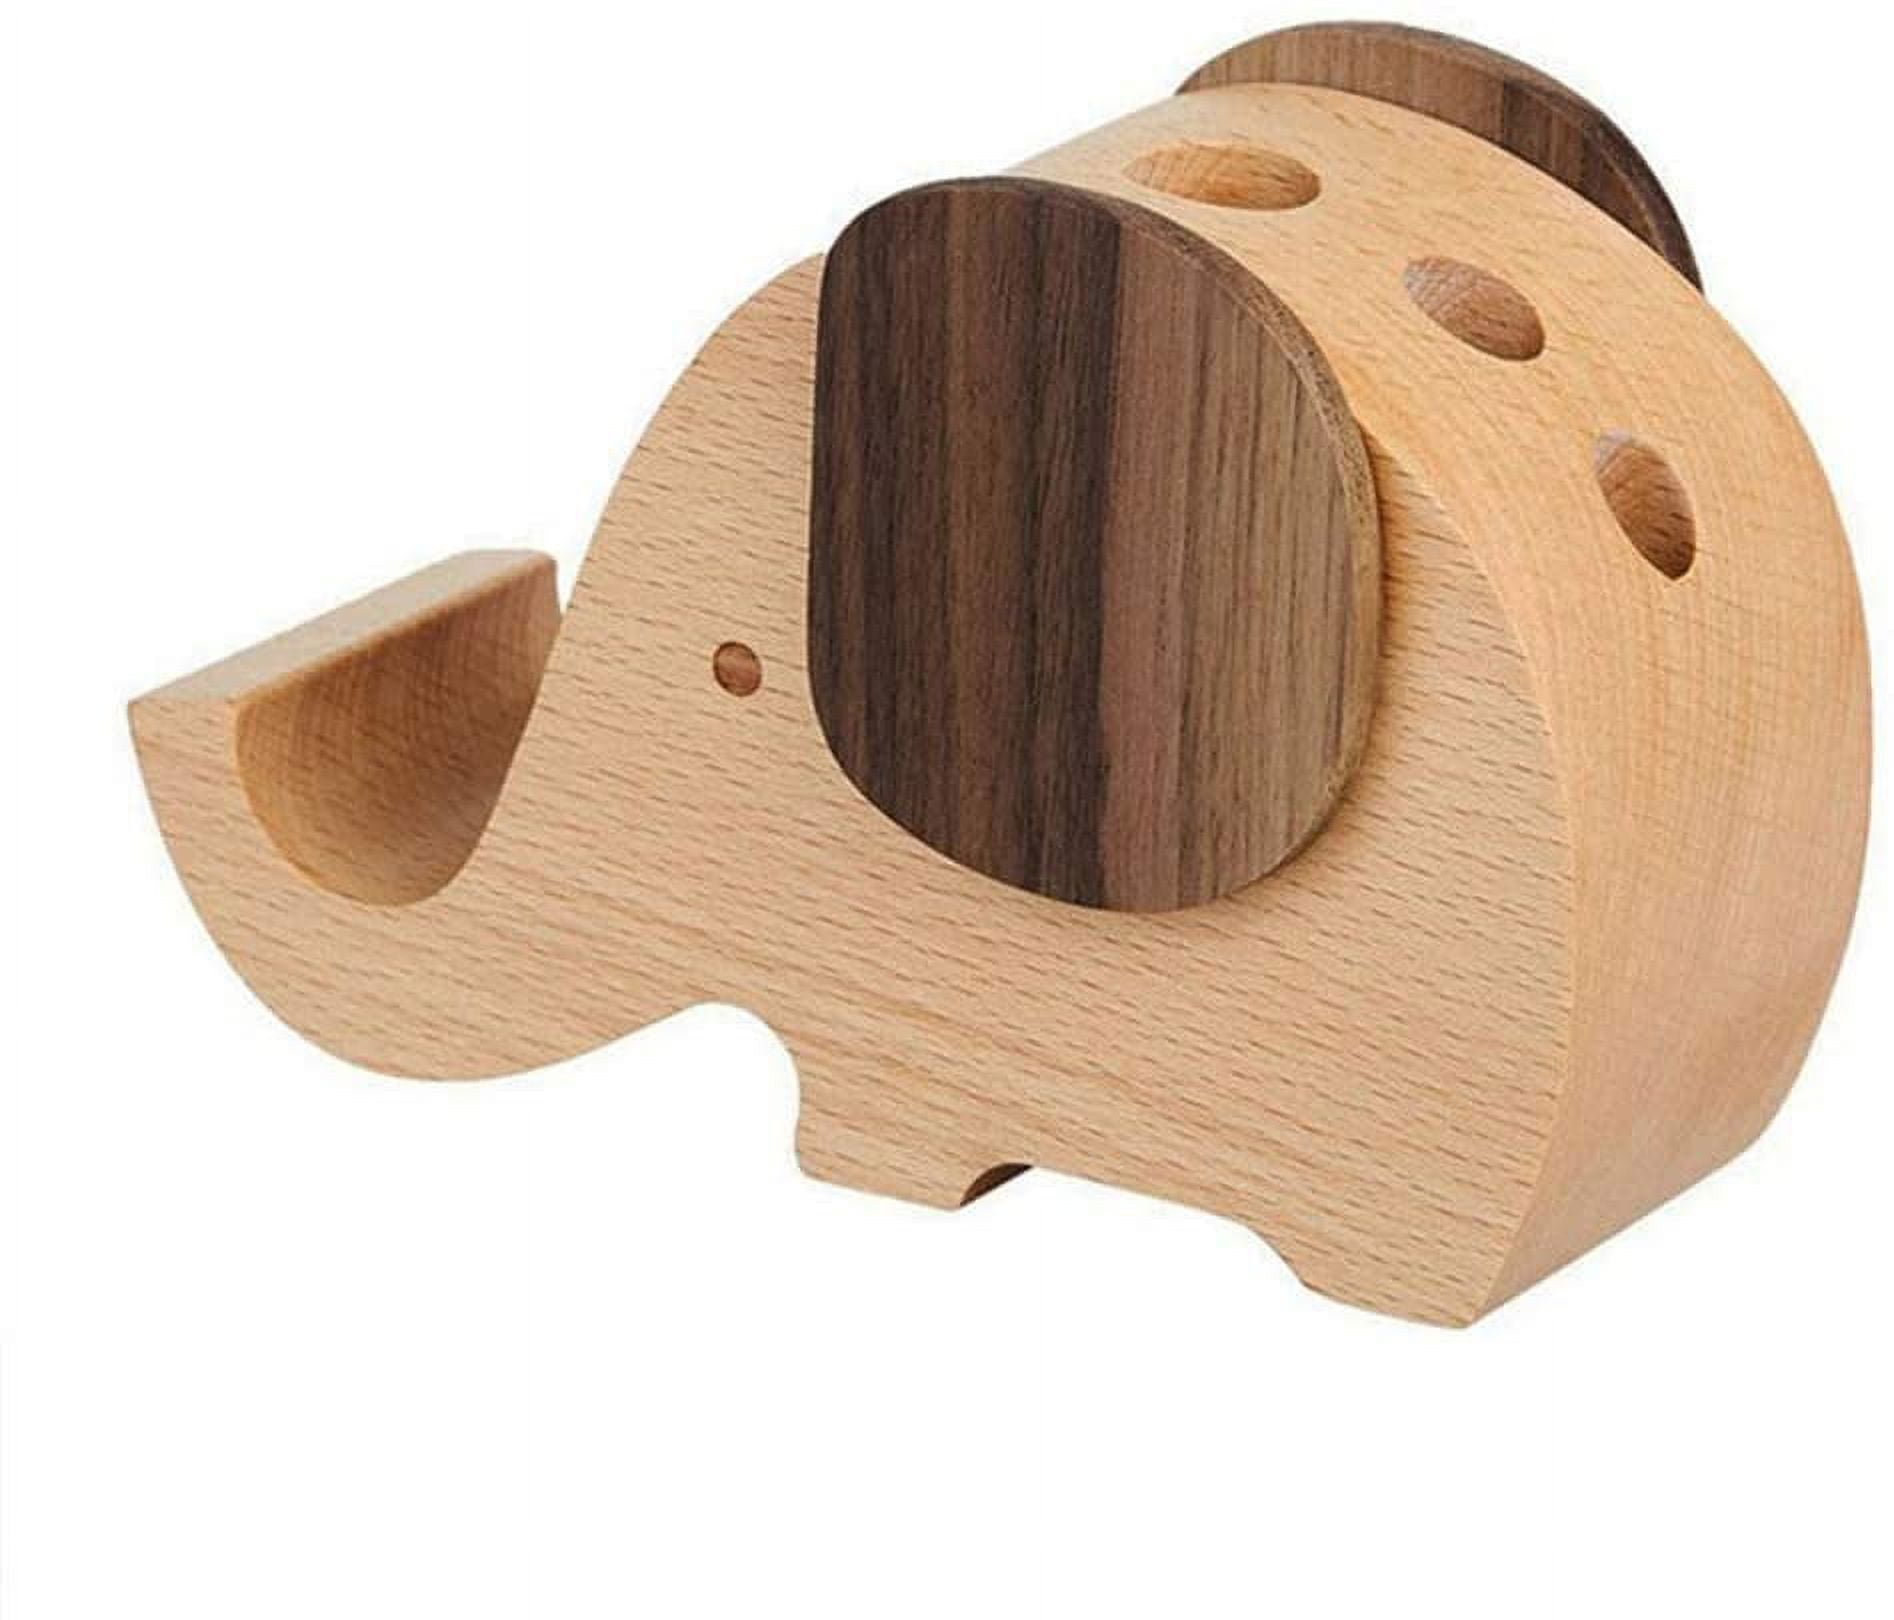 Gifts For Women, Wooden Phone Stand Elephant Gifts For Women Men